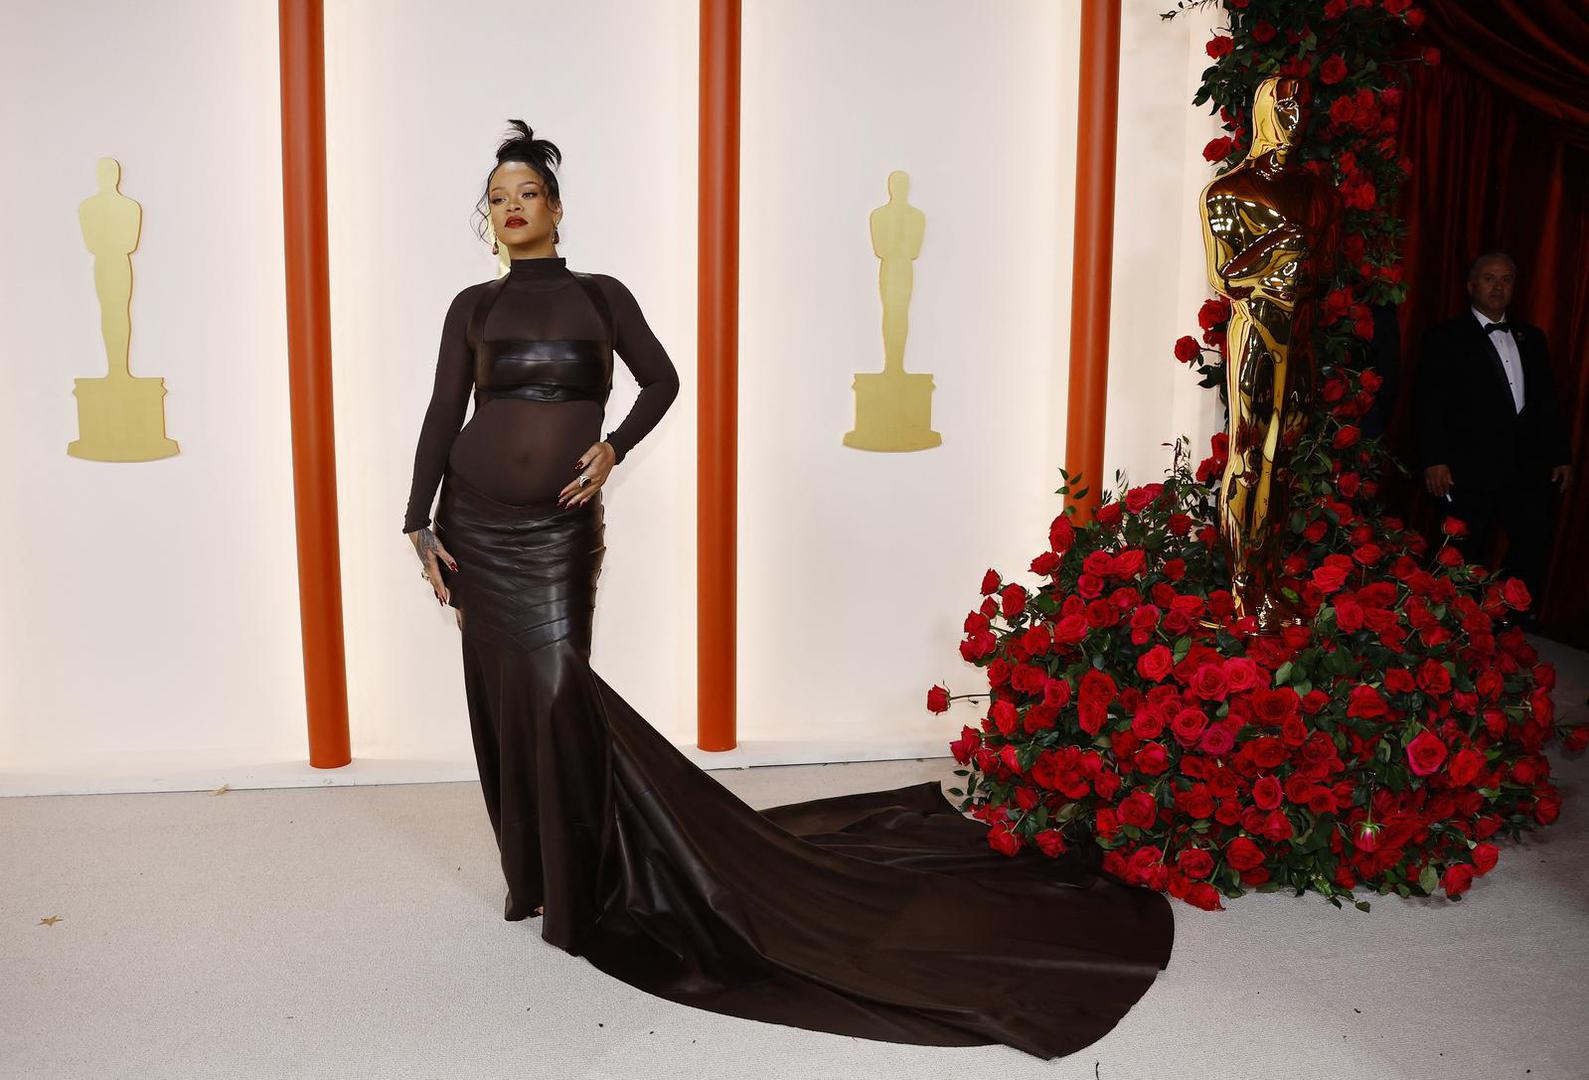 Rihanna poses on the champagne-colored red carpet during the Oscars arrivals at the 95th Academy Awards in Hollywood, Los Angeles, California, U.S., March 12, 2023. REUTERS/Eric Gaillard Photo: ERIC GAILLARD/REUTERS